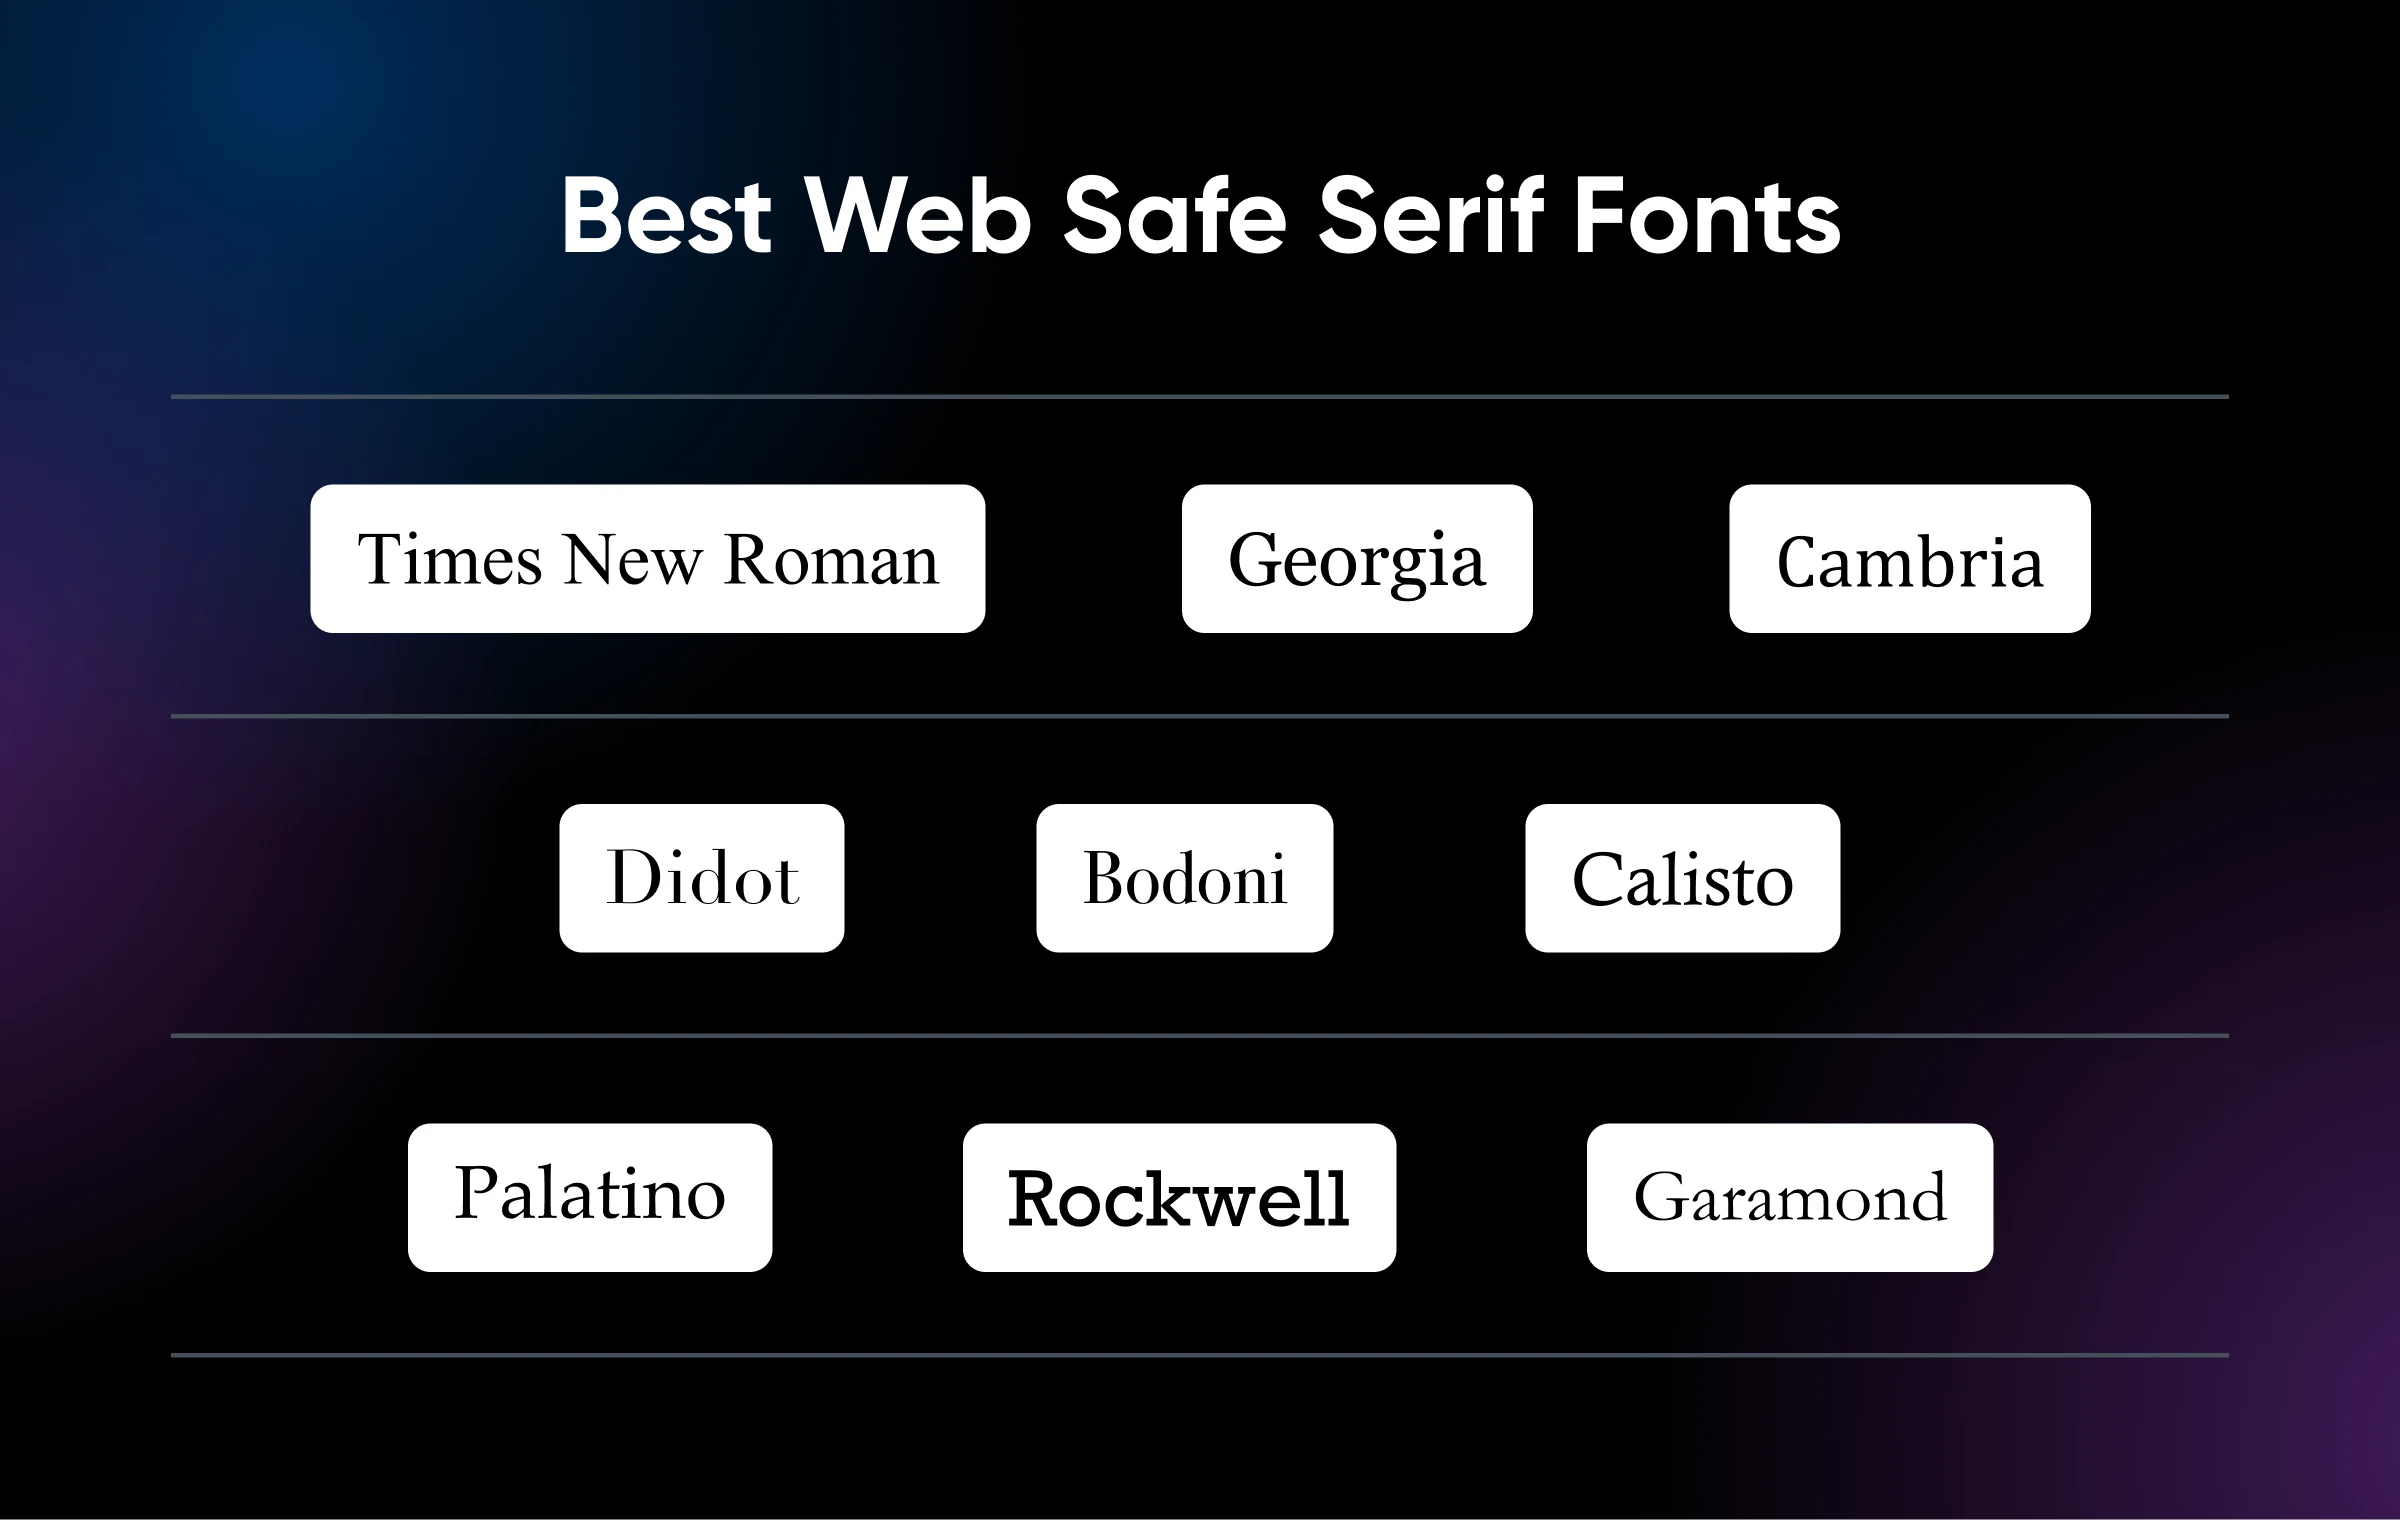 Infographic of best web safe serif fonts including Times New Roman, Georgia, Cambria, and others. Dark gradient background.